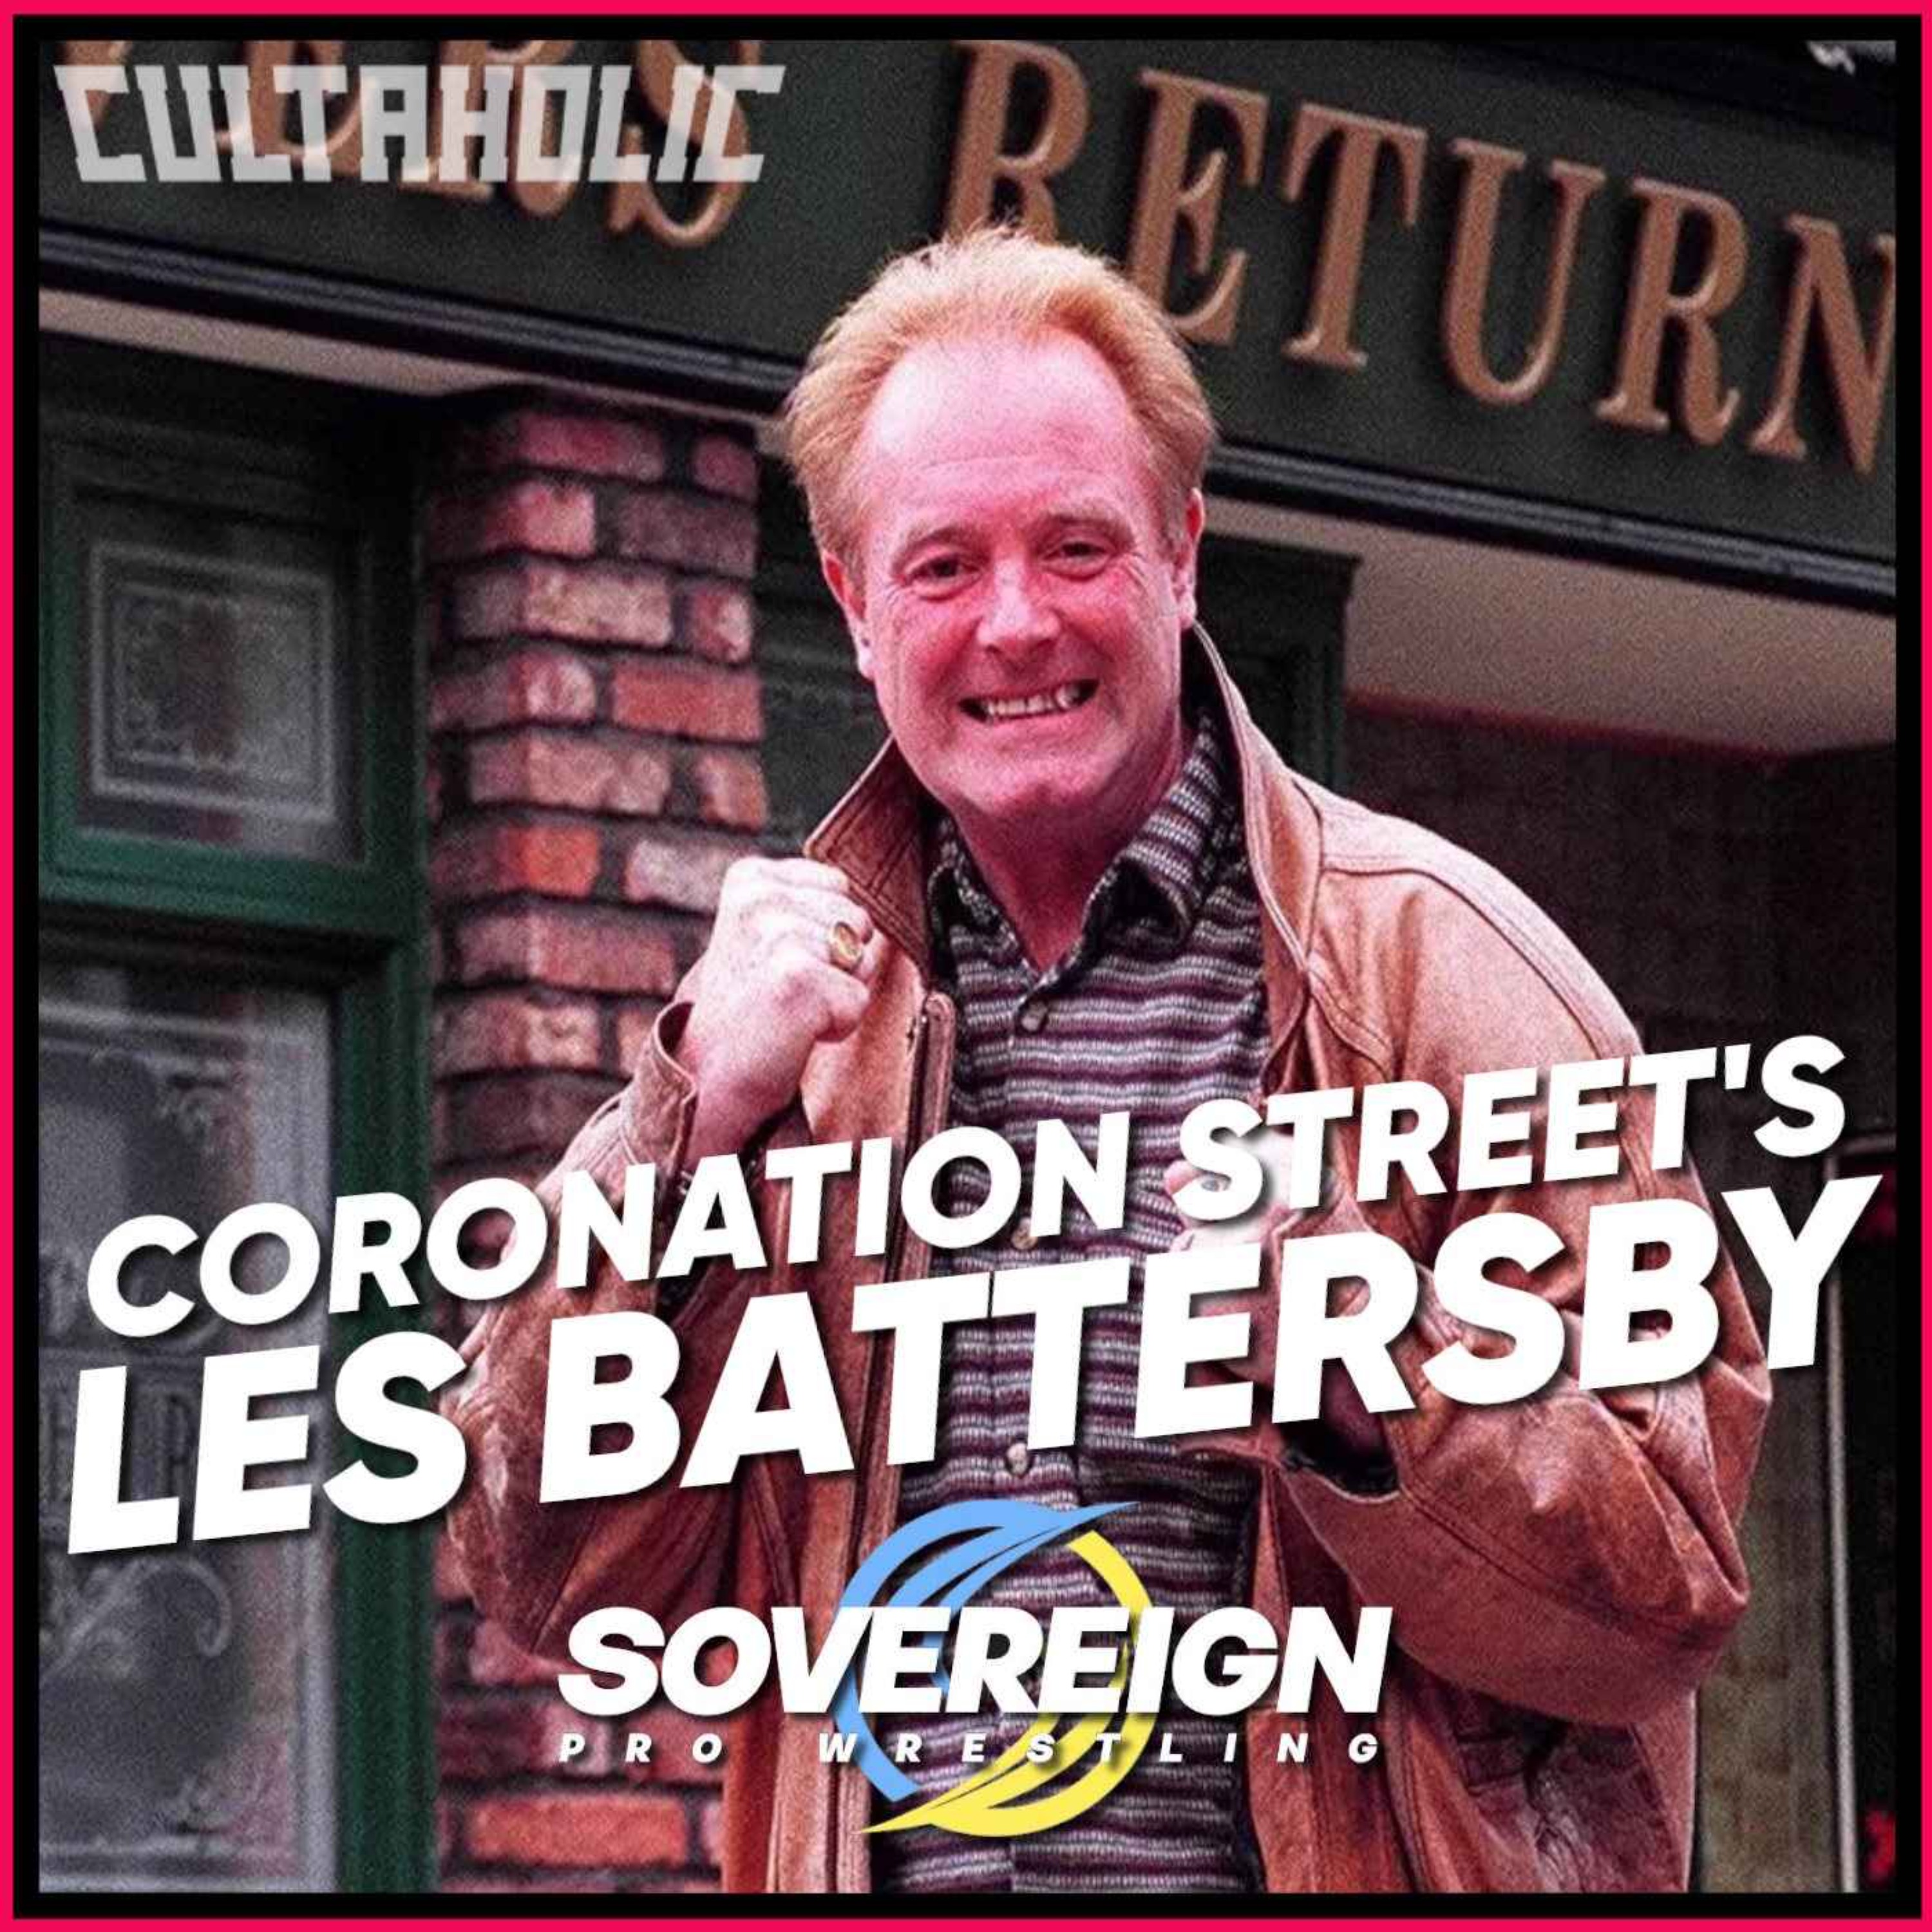 EXCLUSIVE: Coronation Street's LES BATTERSBY on his WRESTLING DEBUT For SovPro and a Dream Match against KEN BARLOW